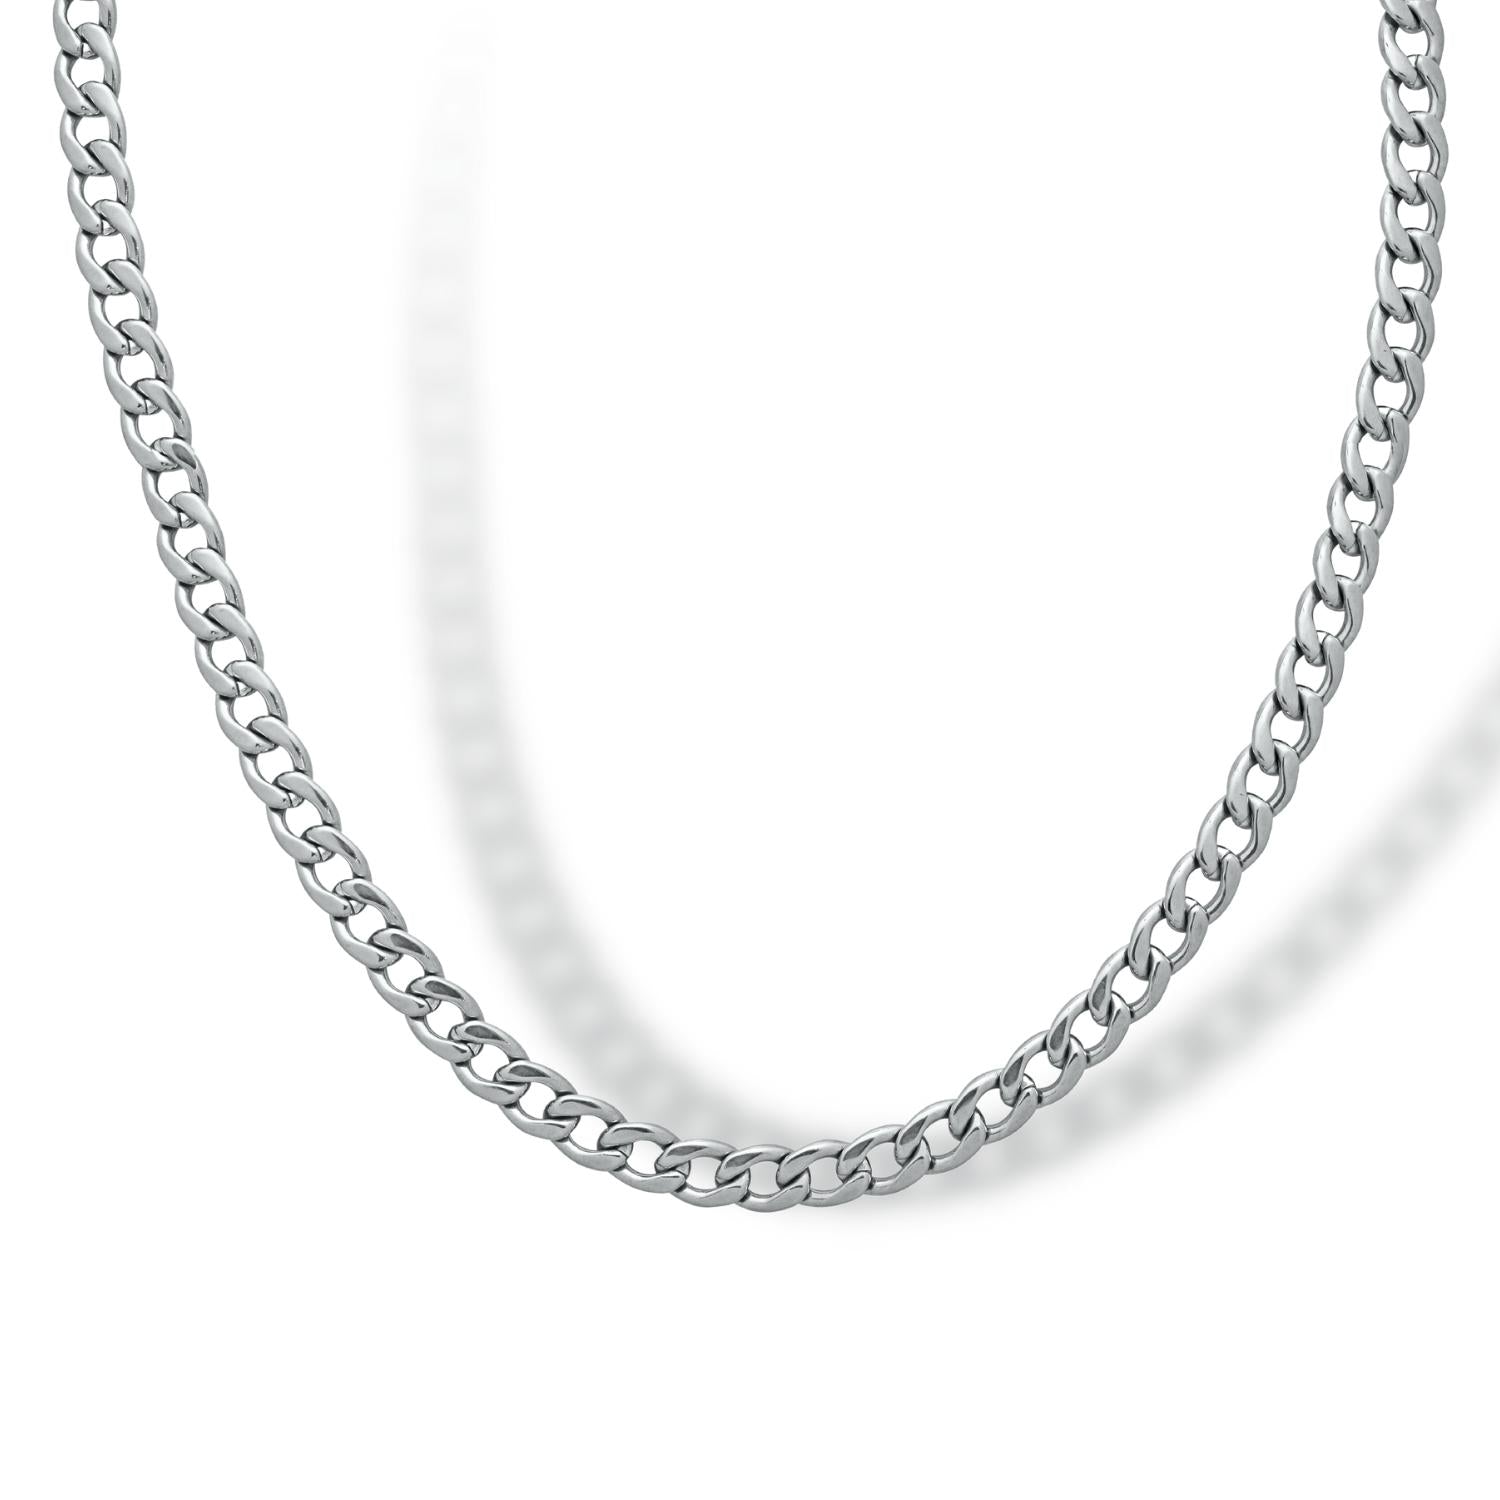 Solid White Gold Curb Chain 3.5mm Width